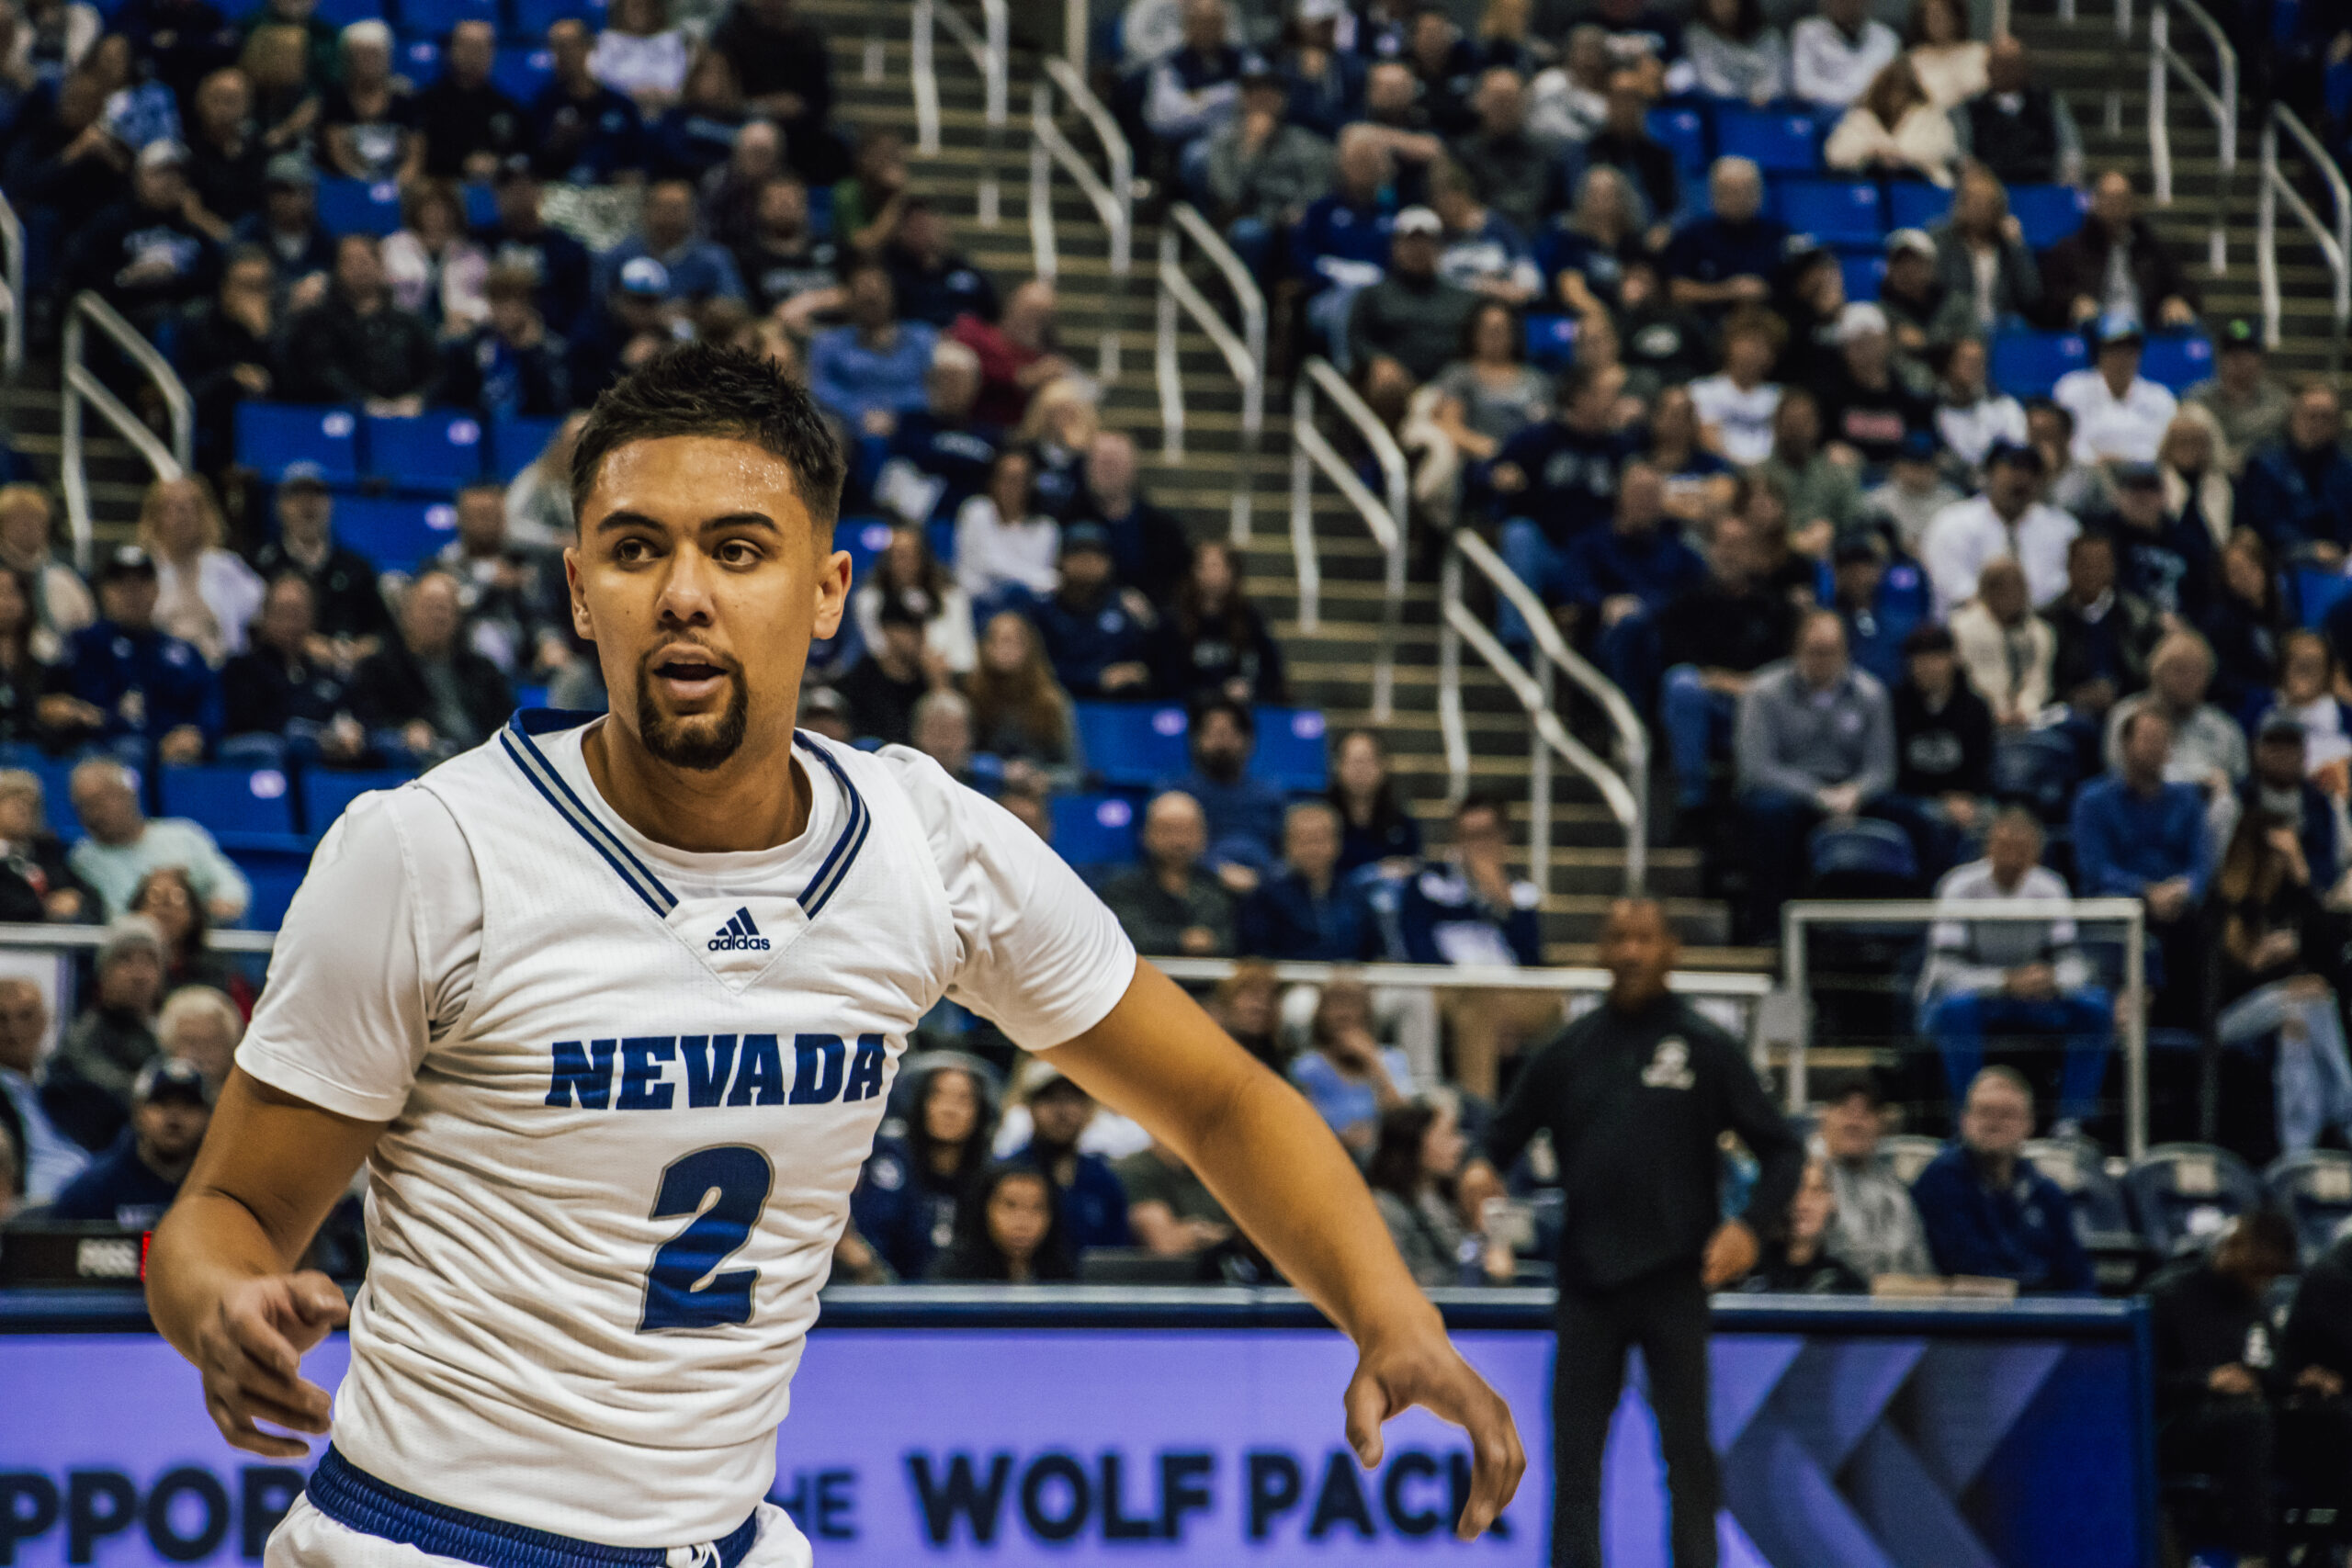 Nevada men’s basketball gets back on track with 77-64 win over No. 24 Colorado State